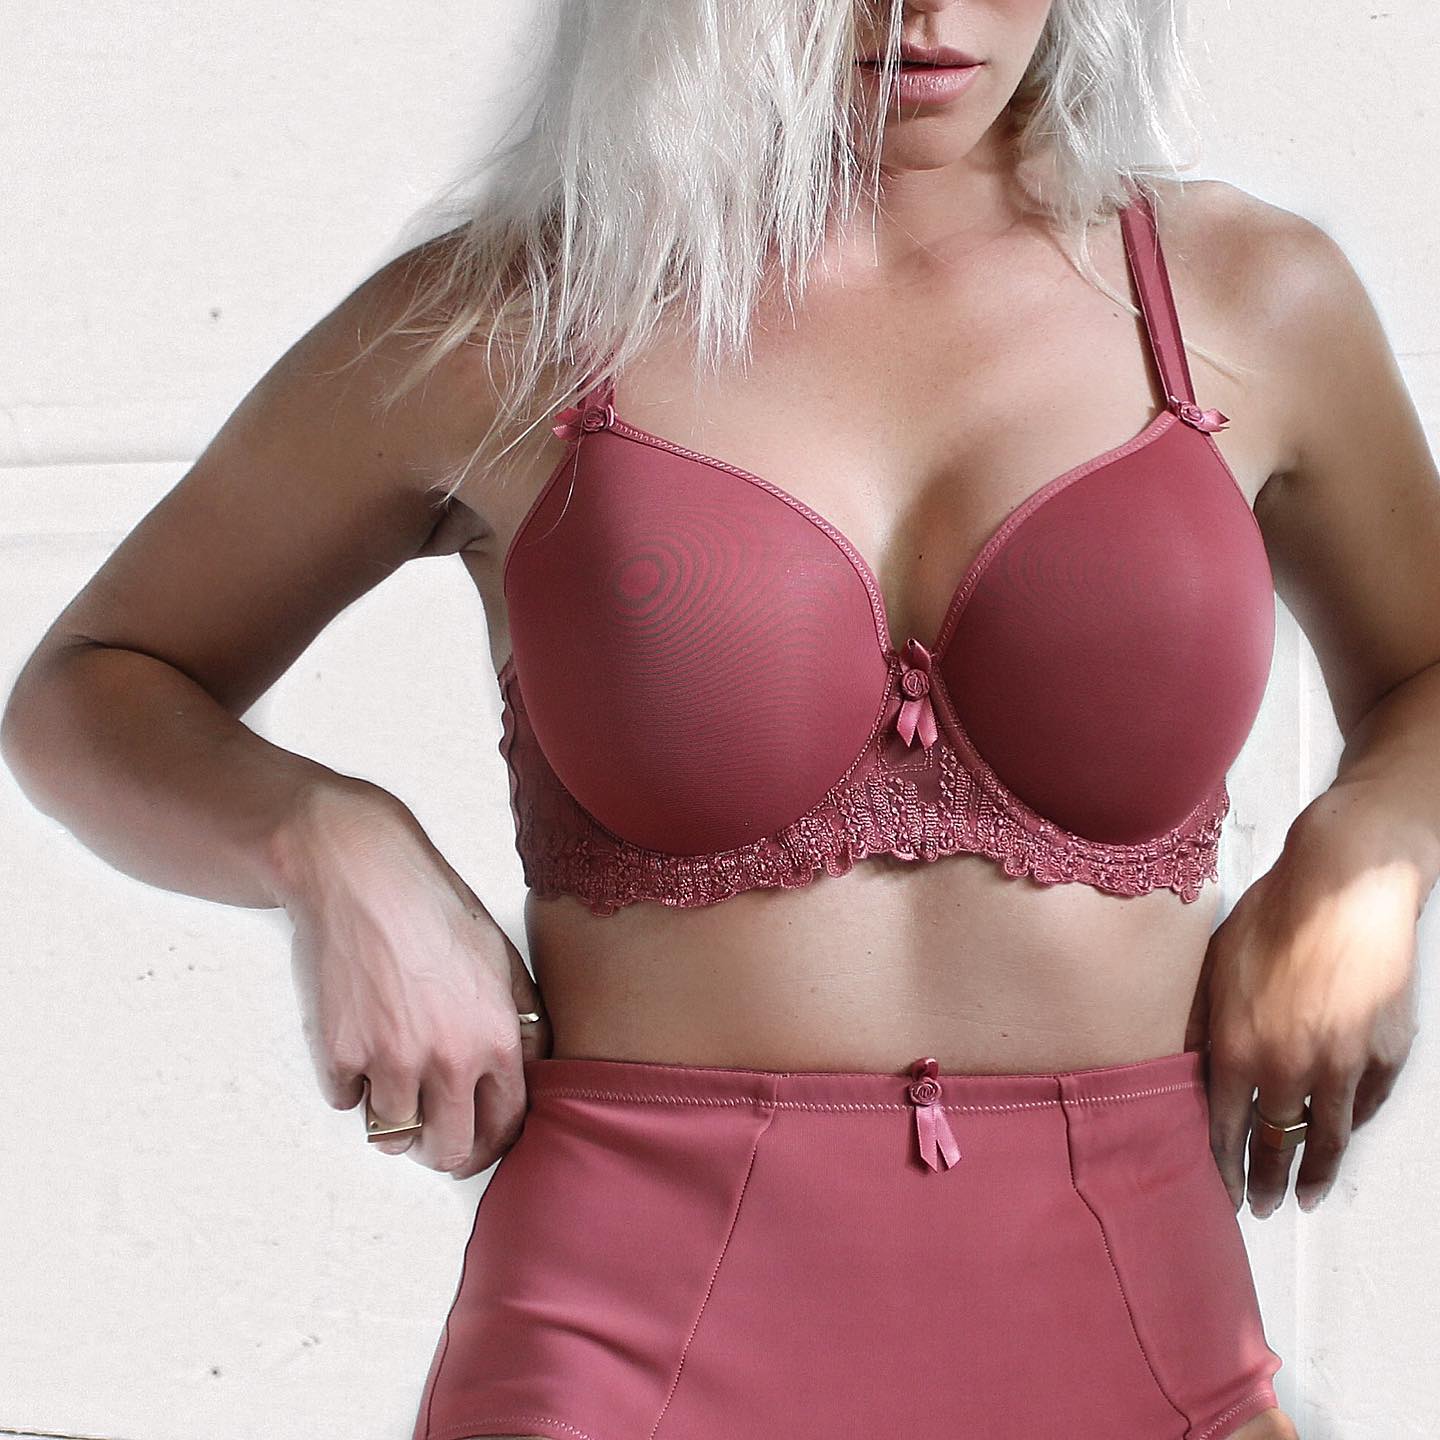 Elise Moulded Bra - Canyon Rose, worn by model, front view